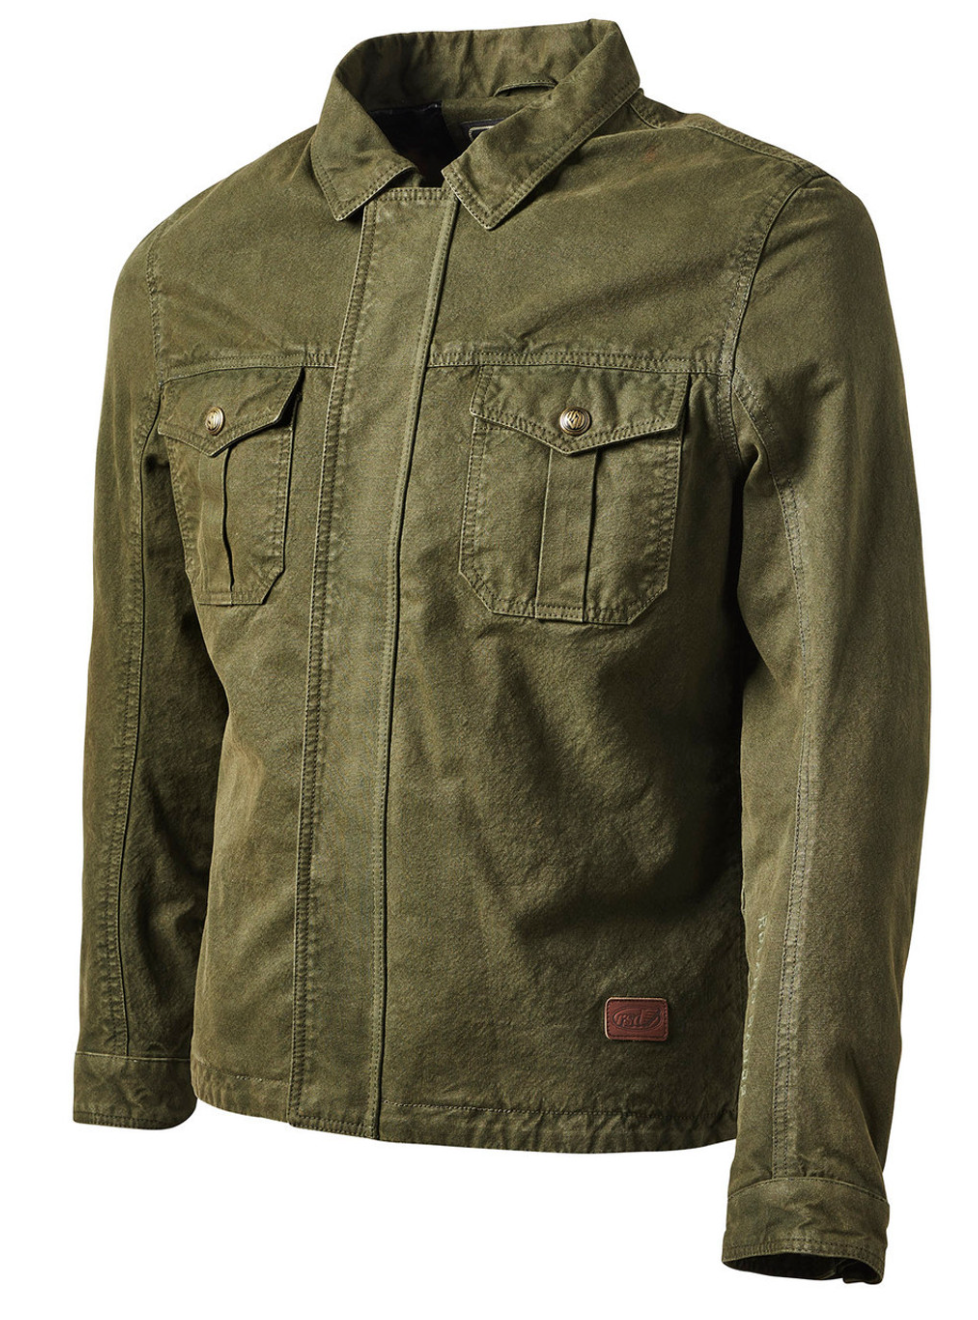 Pismo Riding Shirt Olive